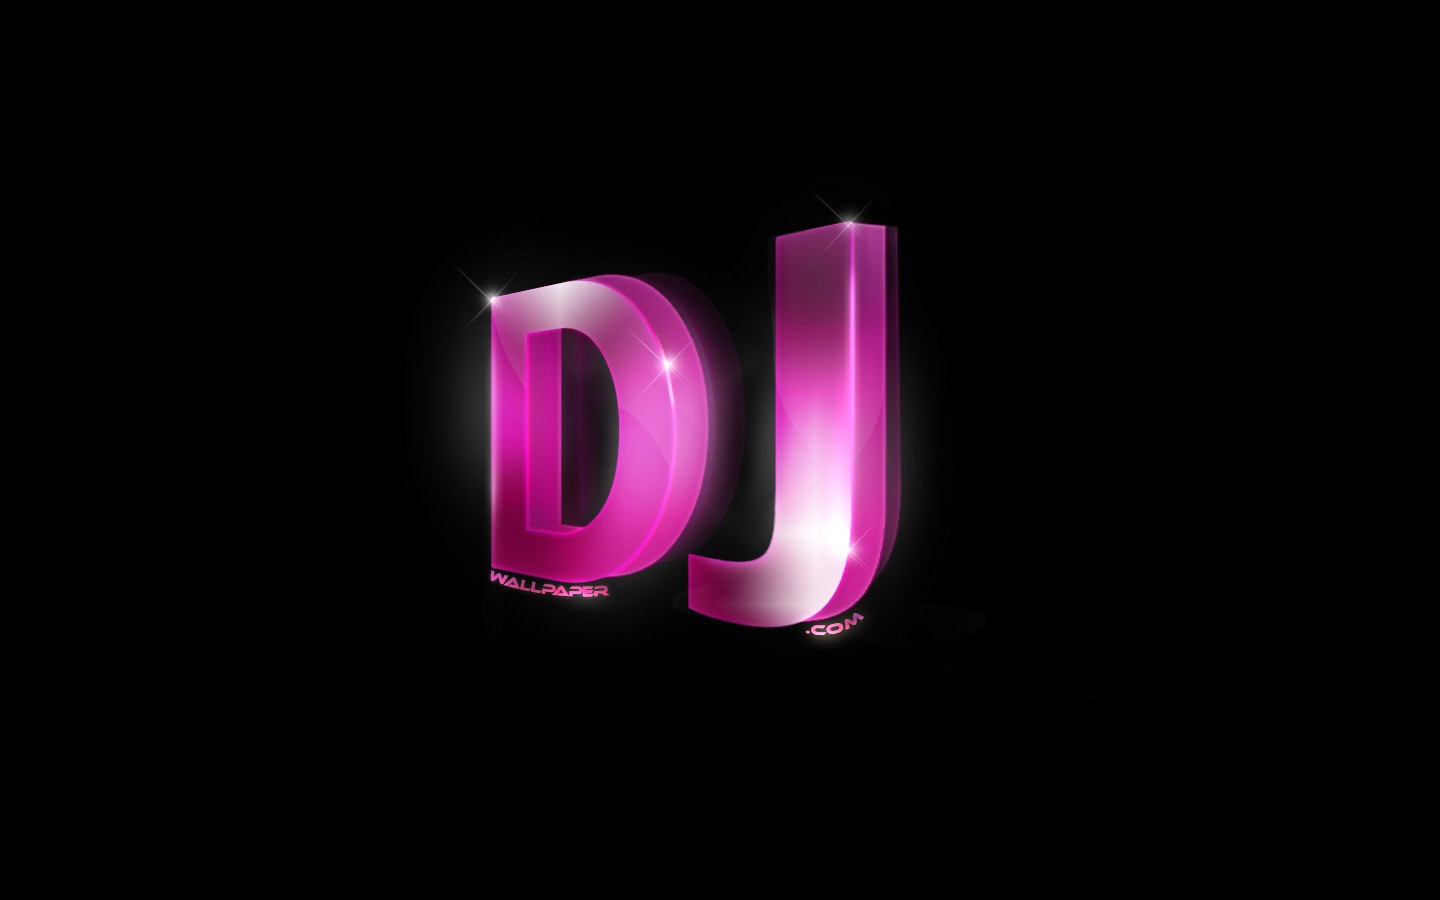 dj 3d price quote template dj on fire 1 2 3 dj ehow com posted an 